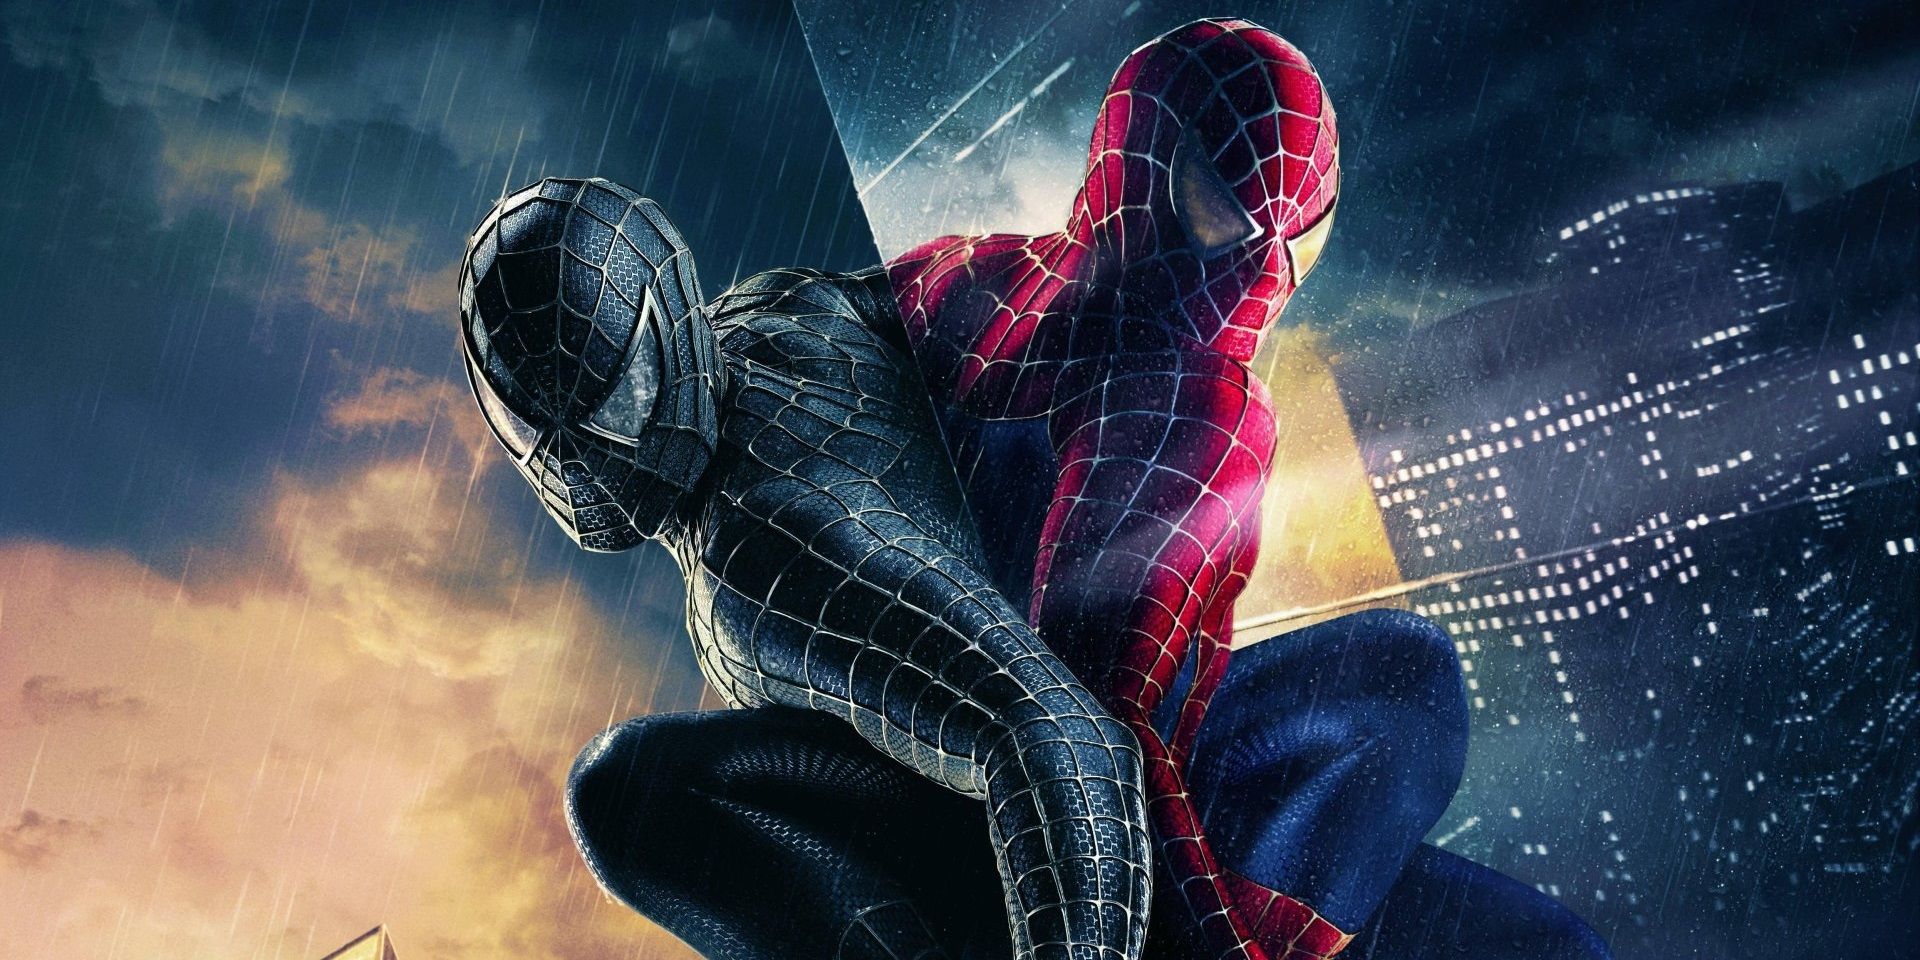 The two different Spider-Man costumes in Spider-Man 3